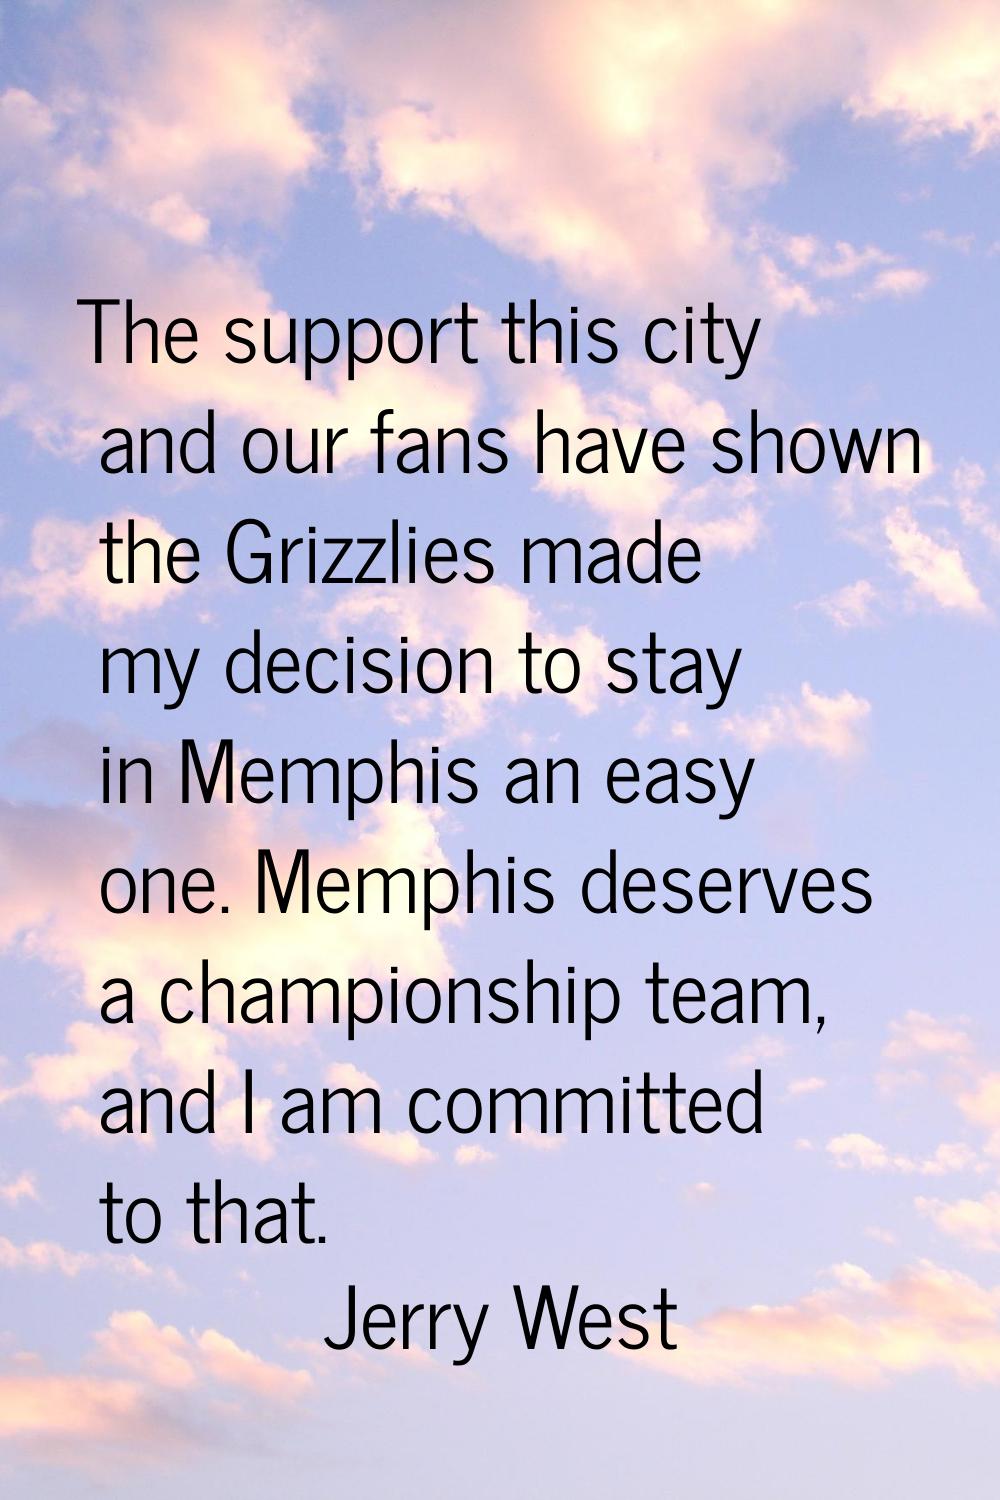 The support this city and our fans have shown the Grizzlies made my decision to stay in Memphis an 